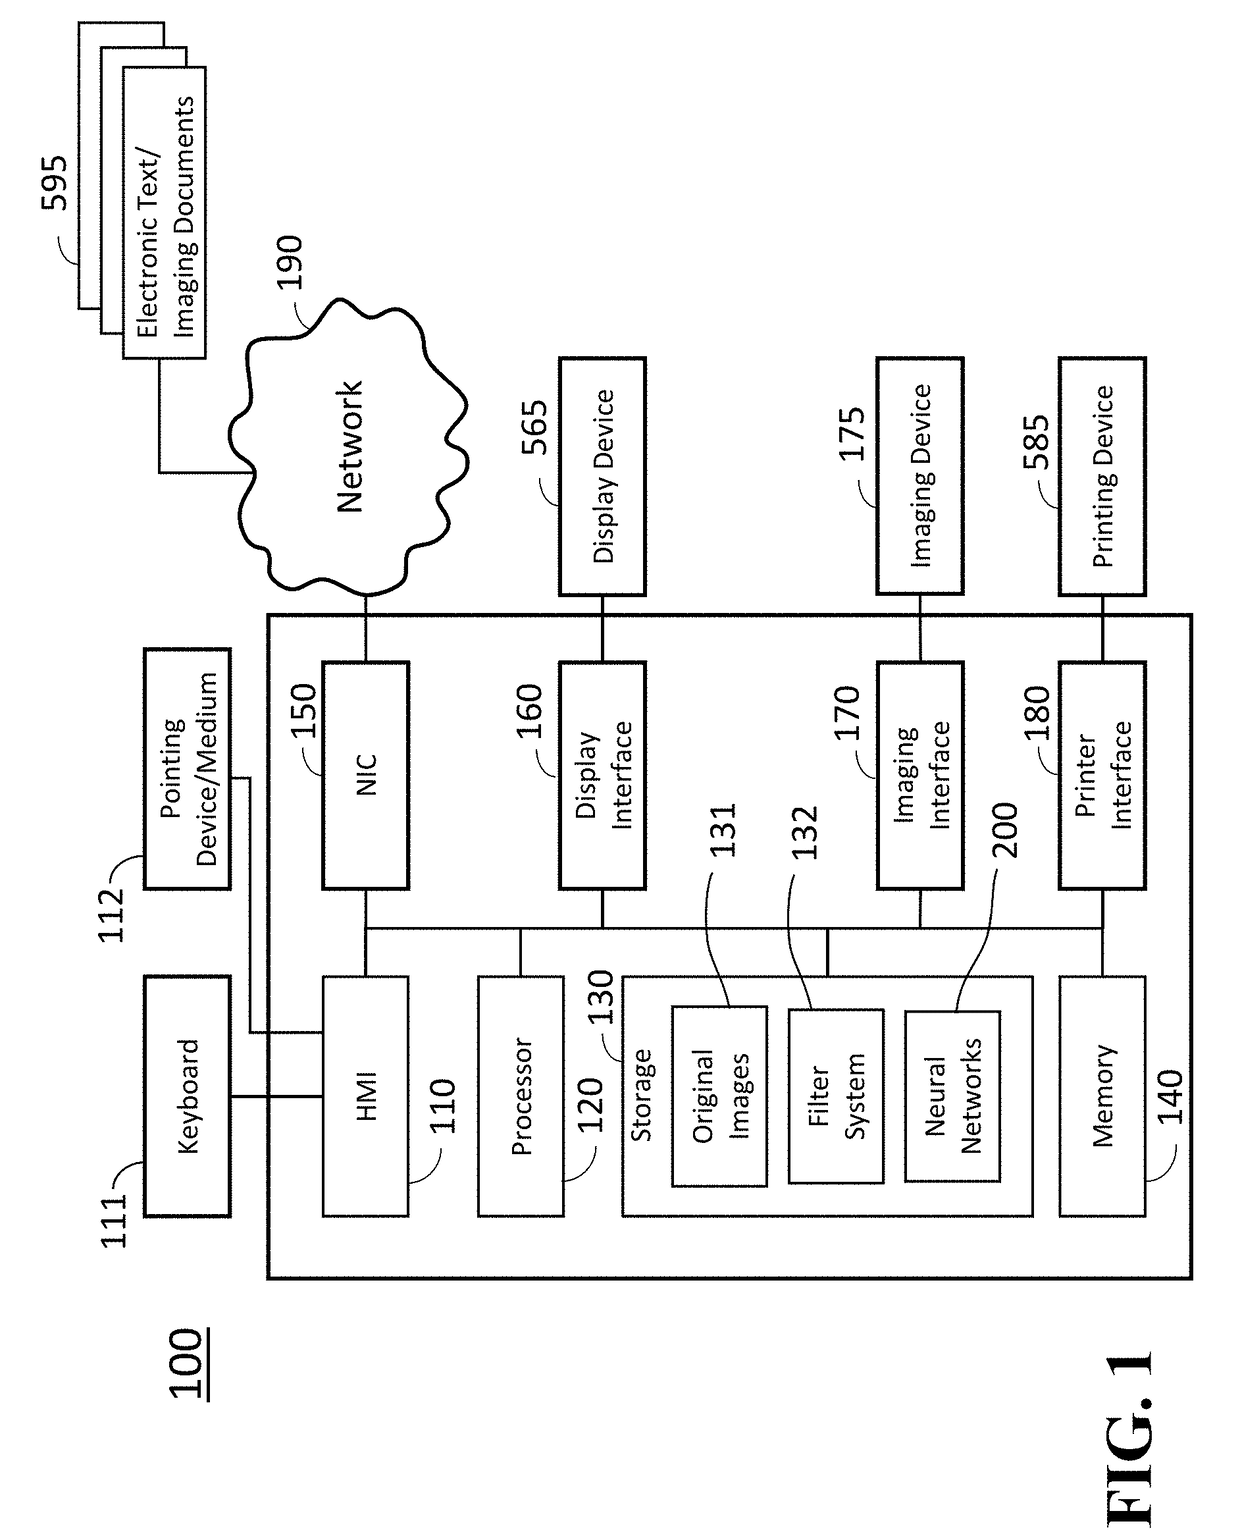 Object Detection System and Object Detection Method